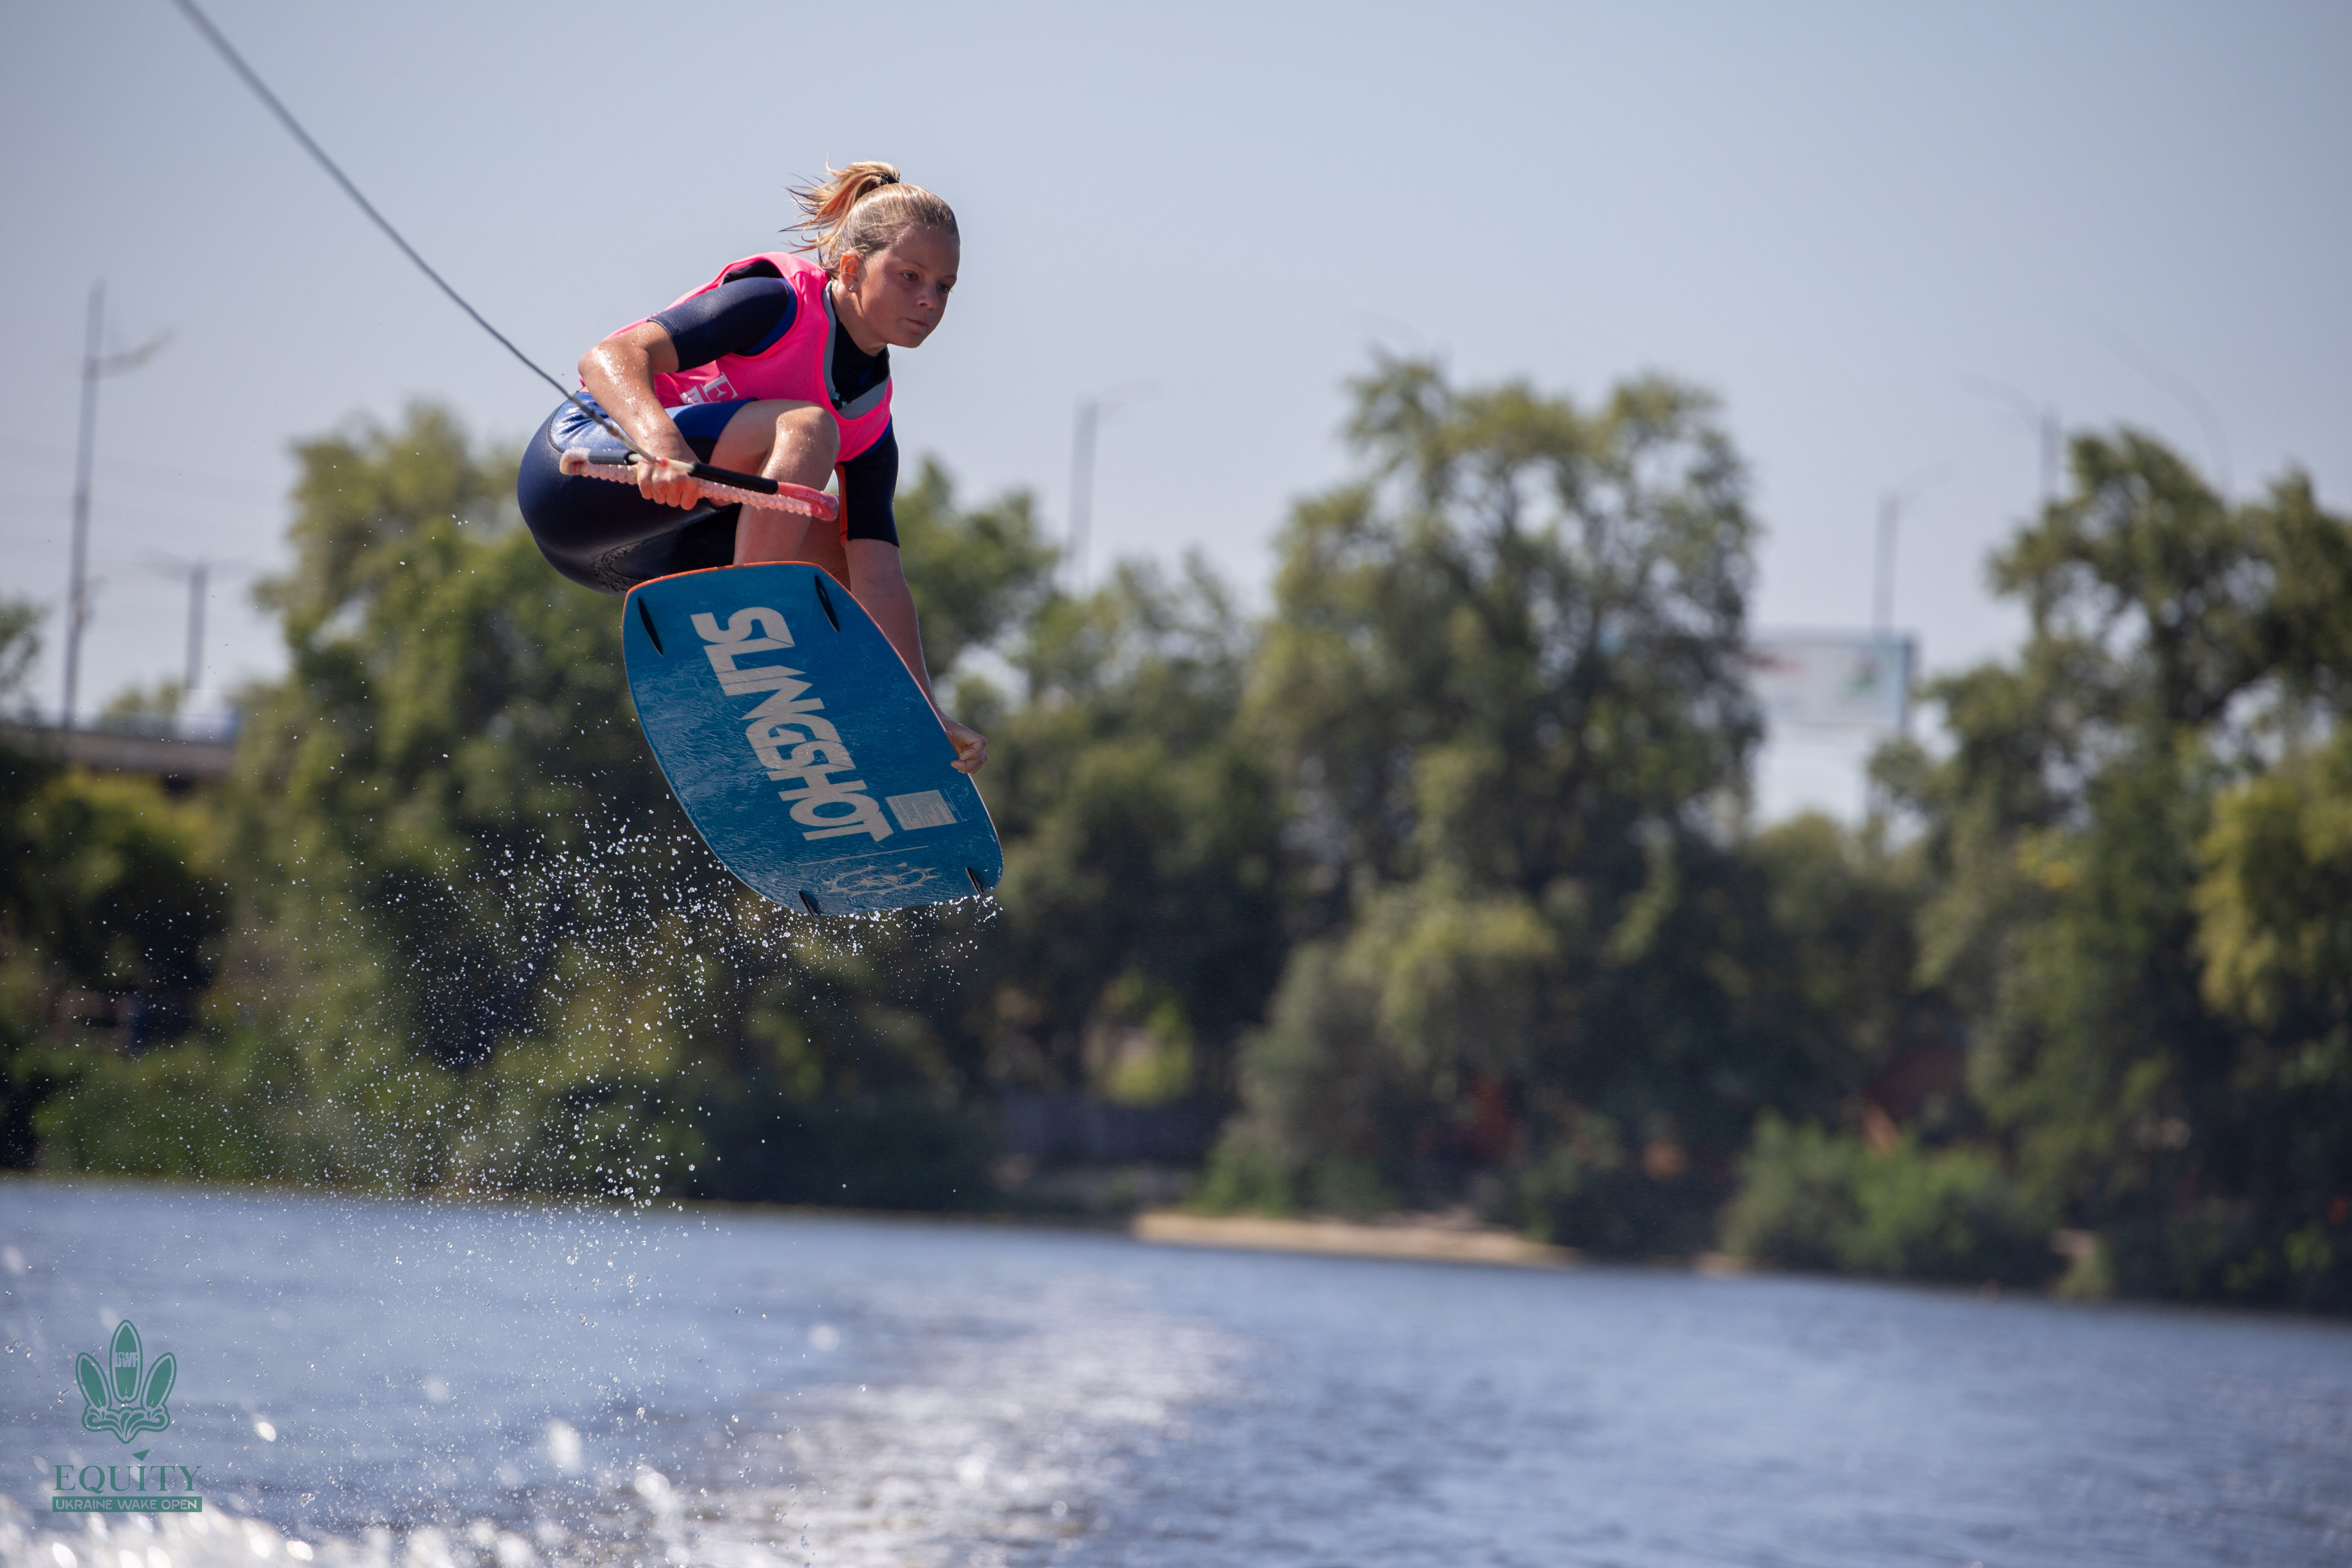 EQUITY acted as the General Partner of the All-Ukrainian Wakeboarding Competition.